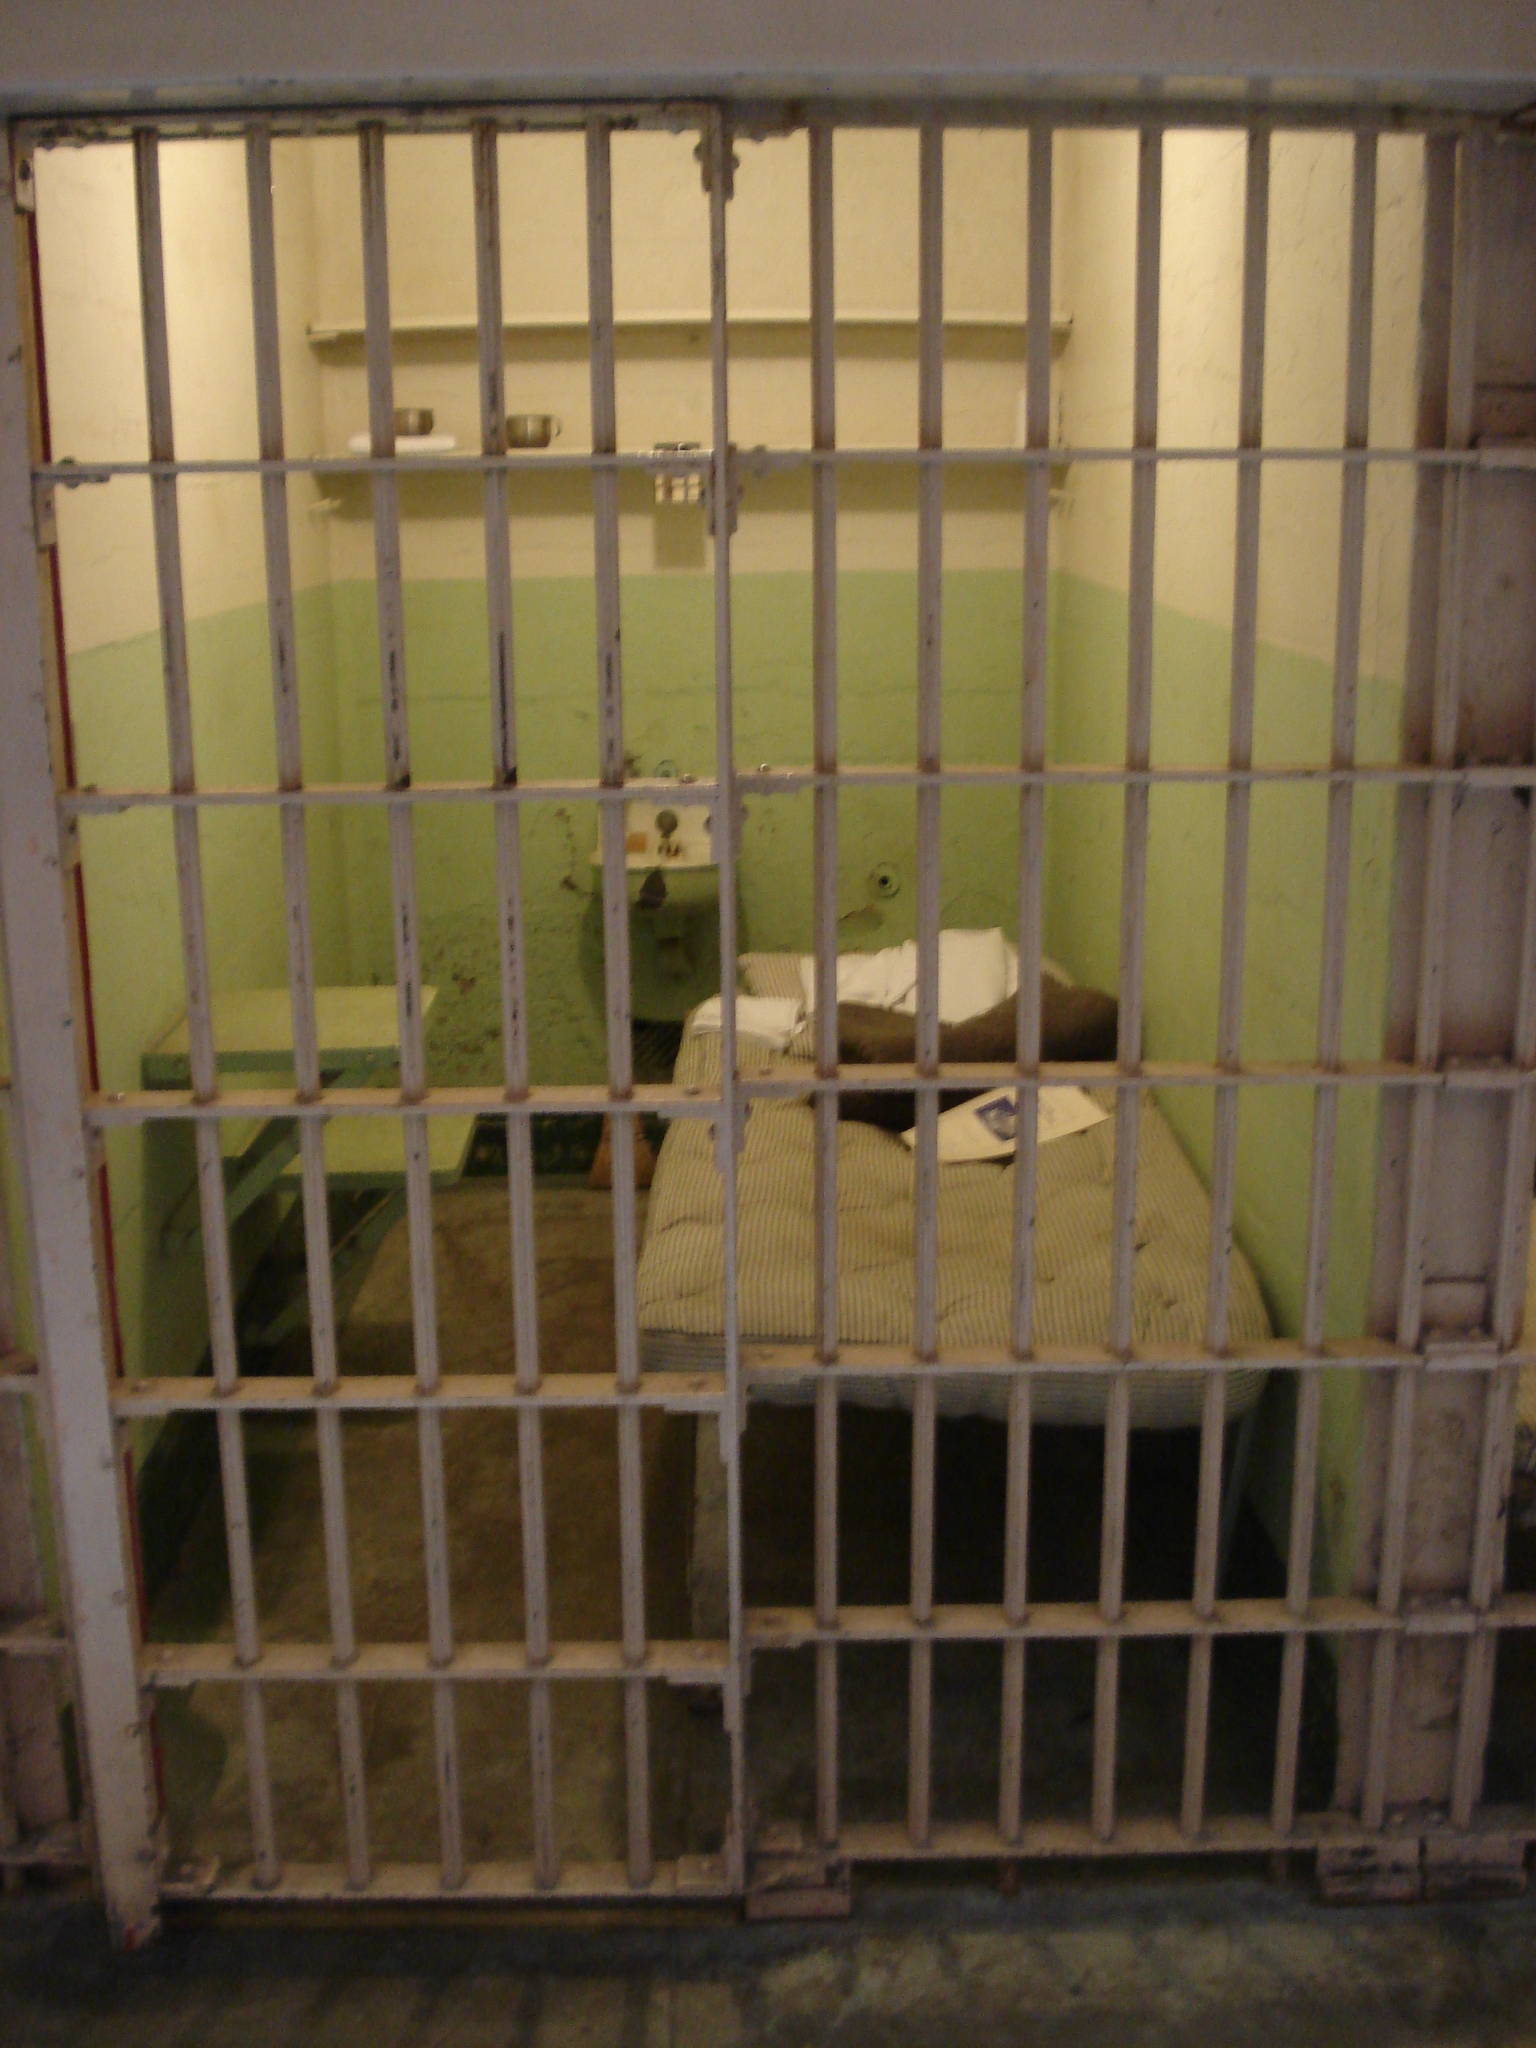 some prison bars are in an area with bedding